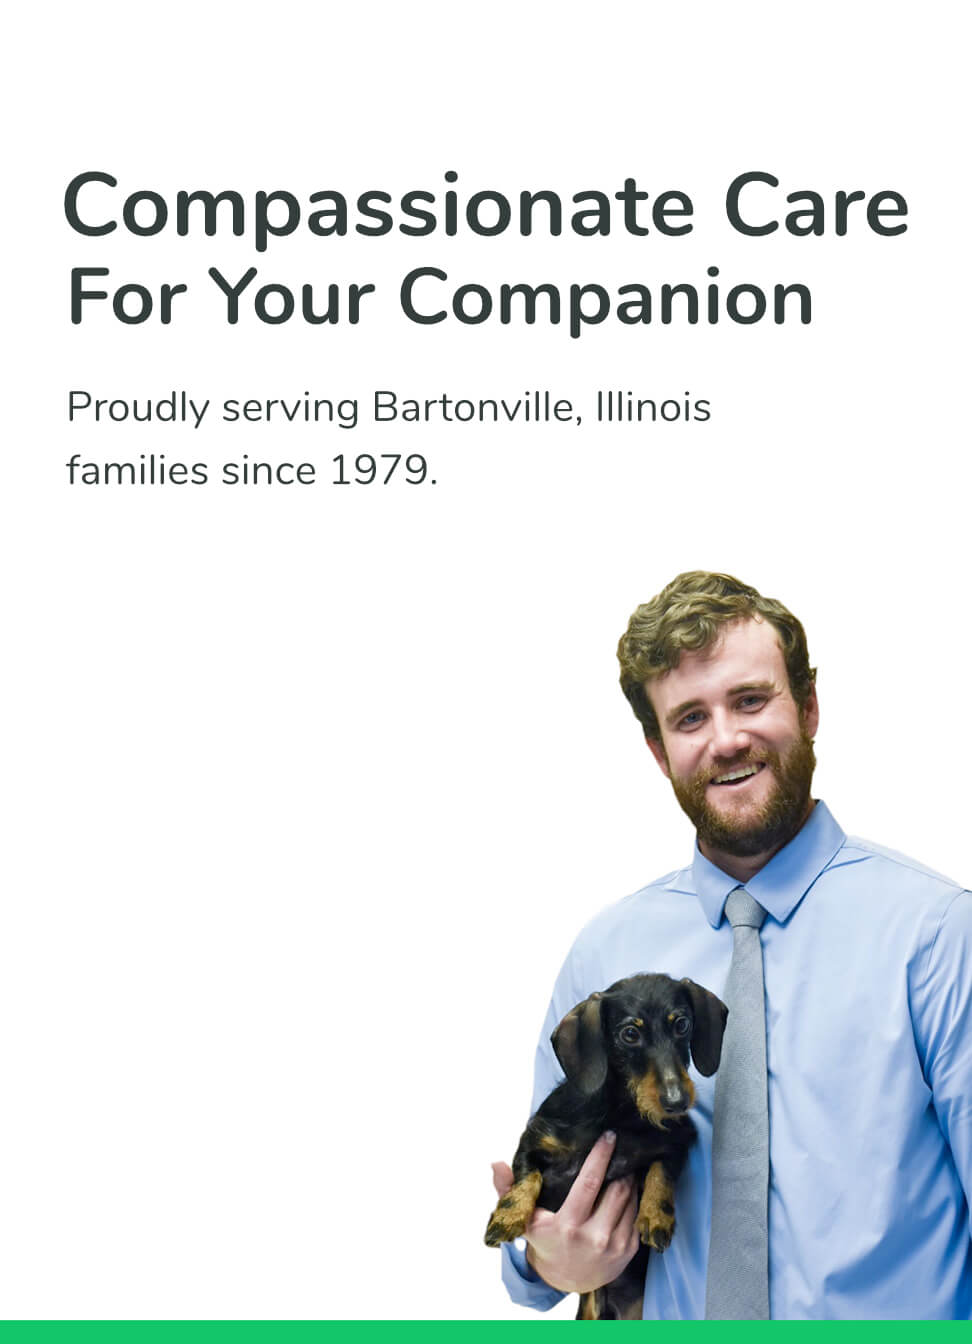 Compassionate Care For Your Companion. Proudly serving Bartonville Illinois families since 1979.